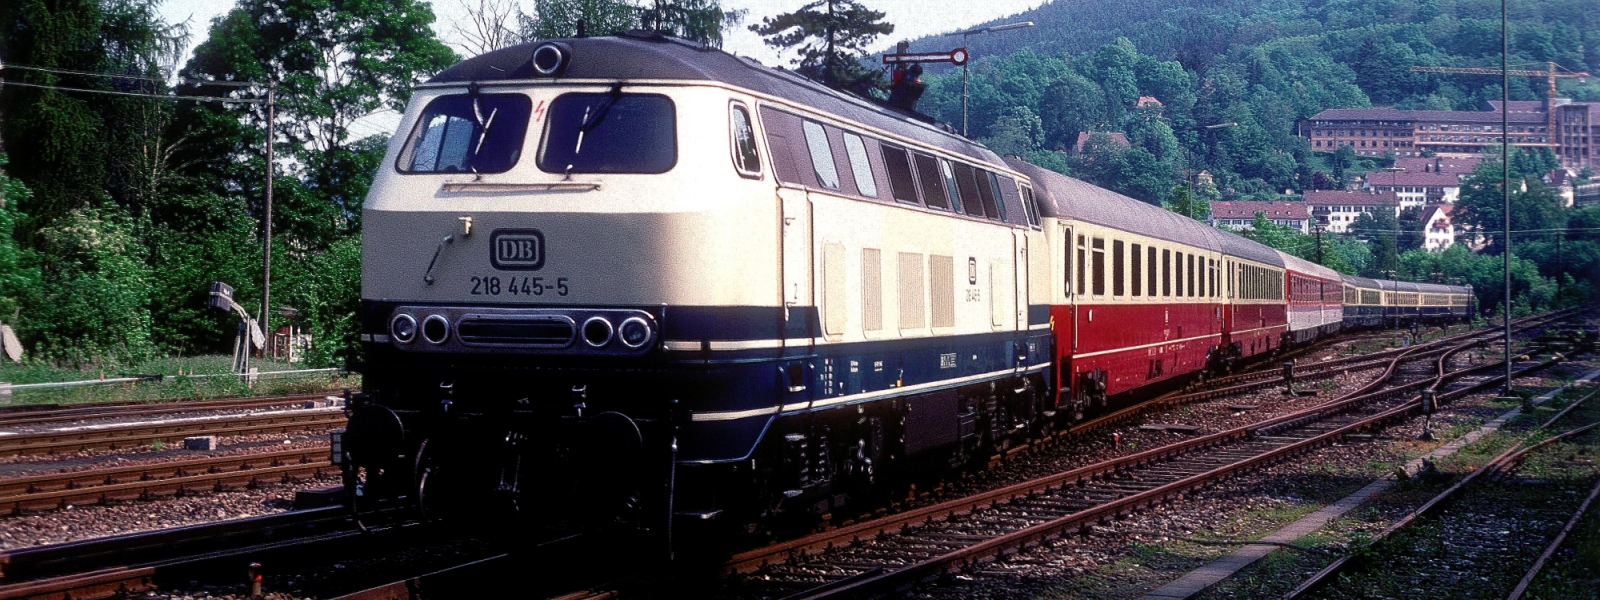 218 445 with a colorfully composed passenger train in May 1989 in Calw